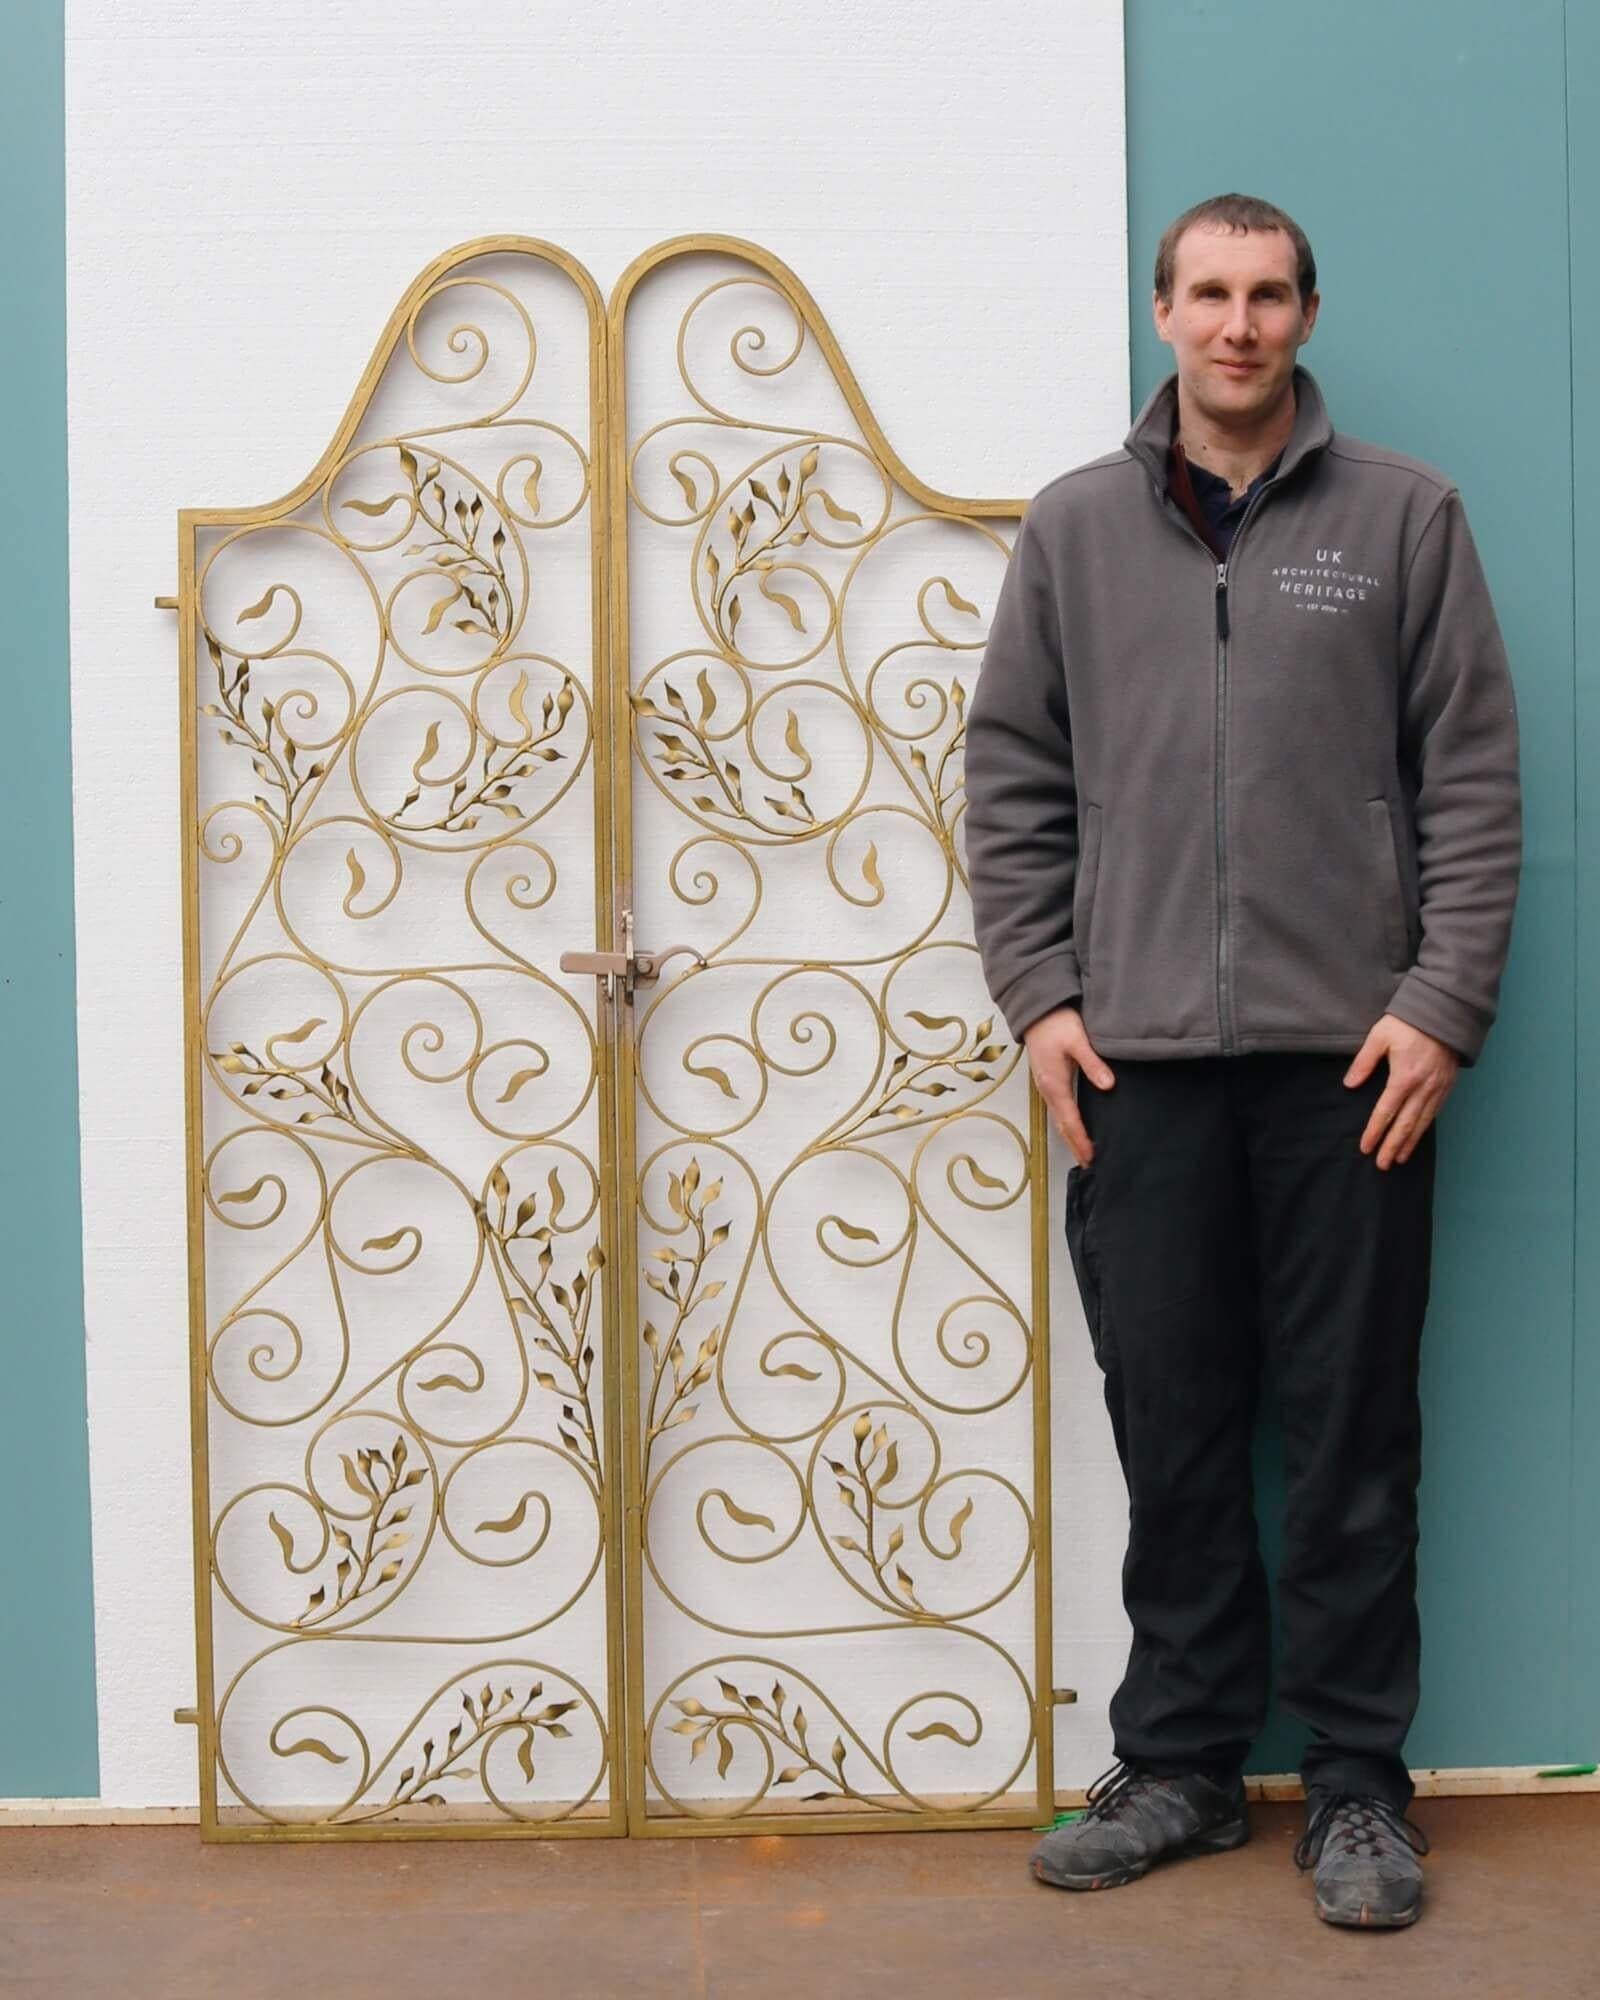 With their painted gold finish and ornate design, this set of Hollywood Regency style gates make a beautiful feature at the entrance to a garden or walled courtyard. Dating from the mid 20th century, these wrought iron gates are beautifully